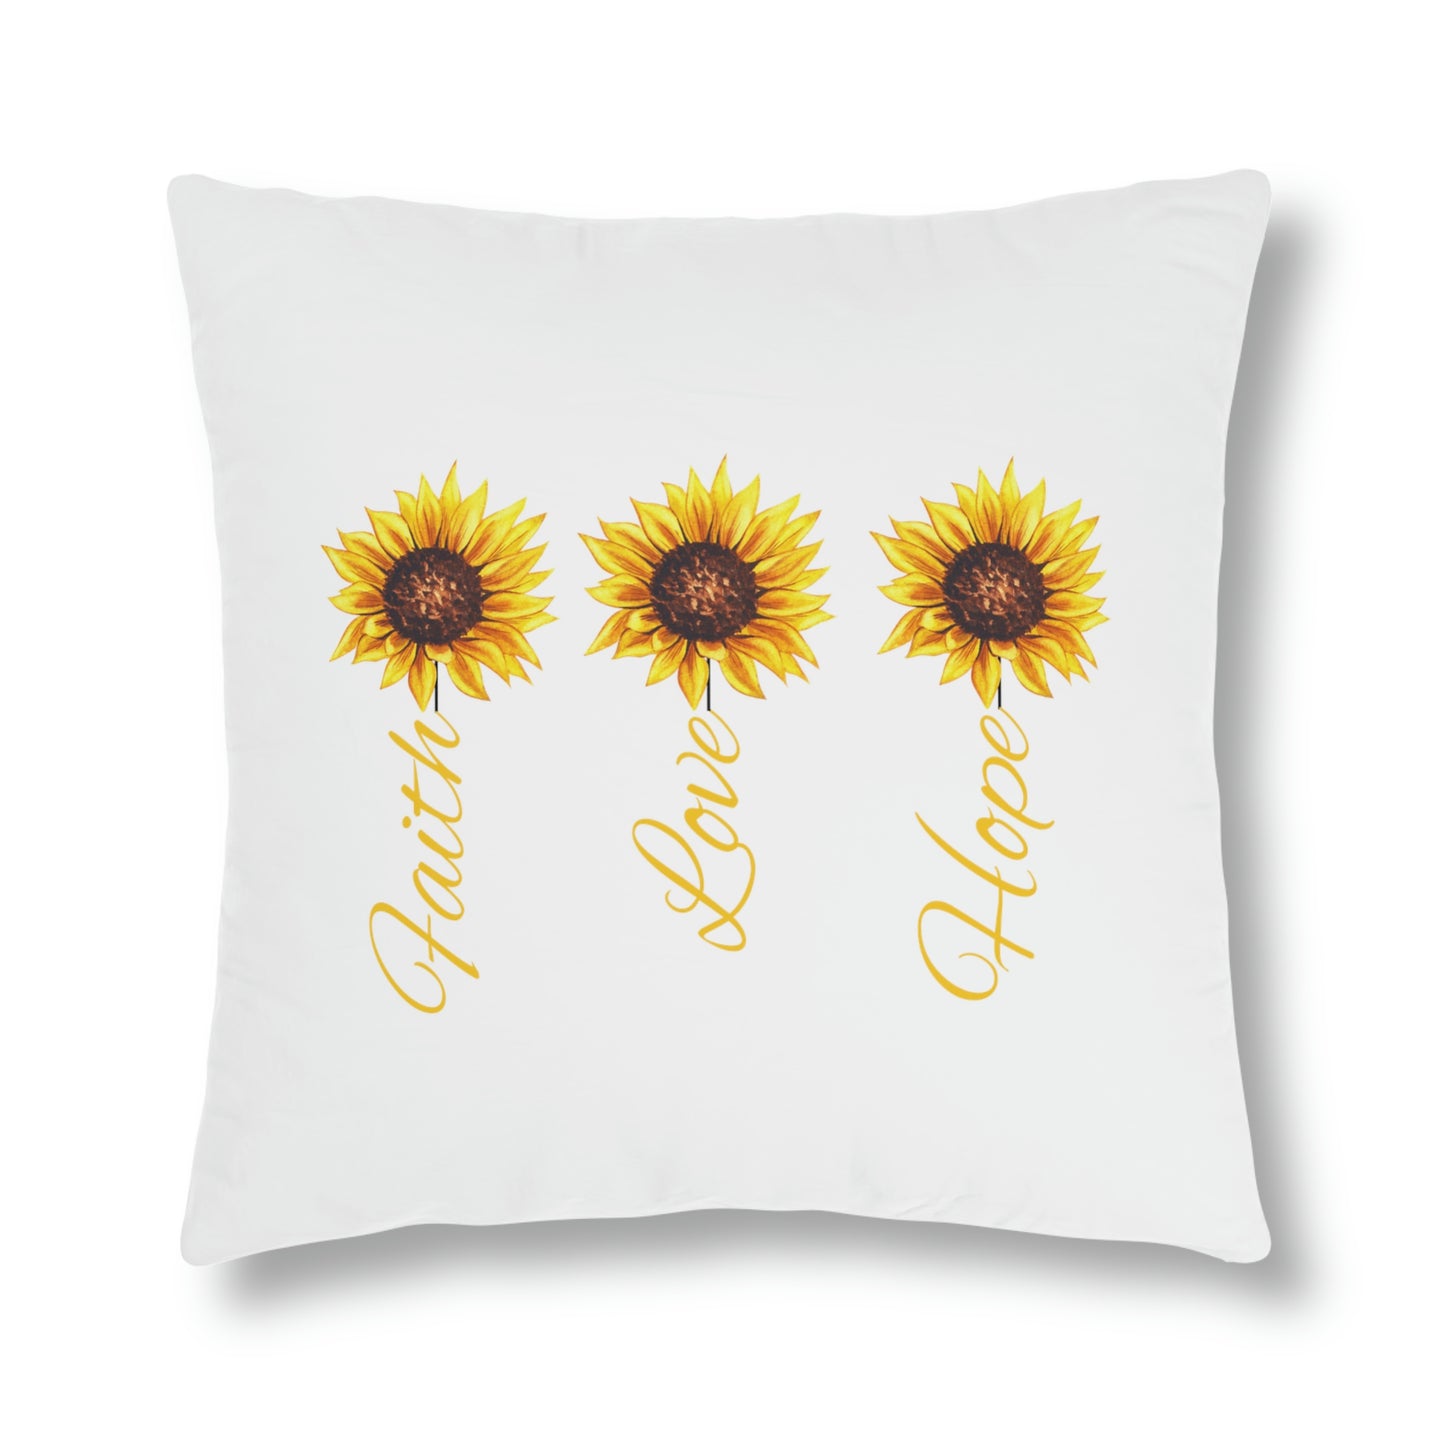 faith, love hope sunflower outdoor pillow for a porch or patio